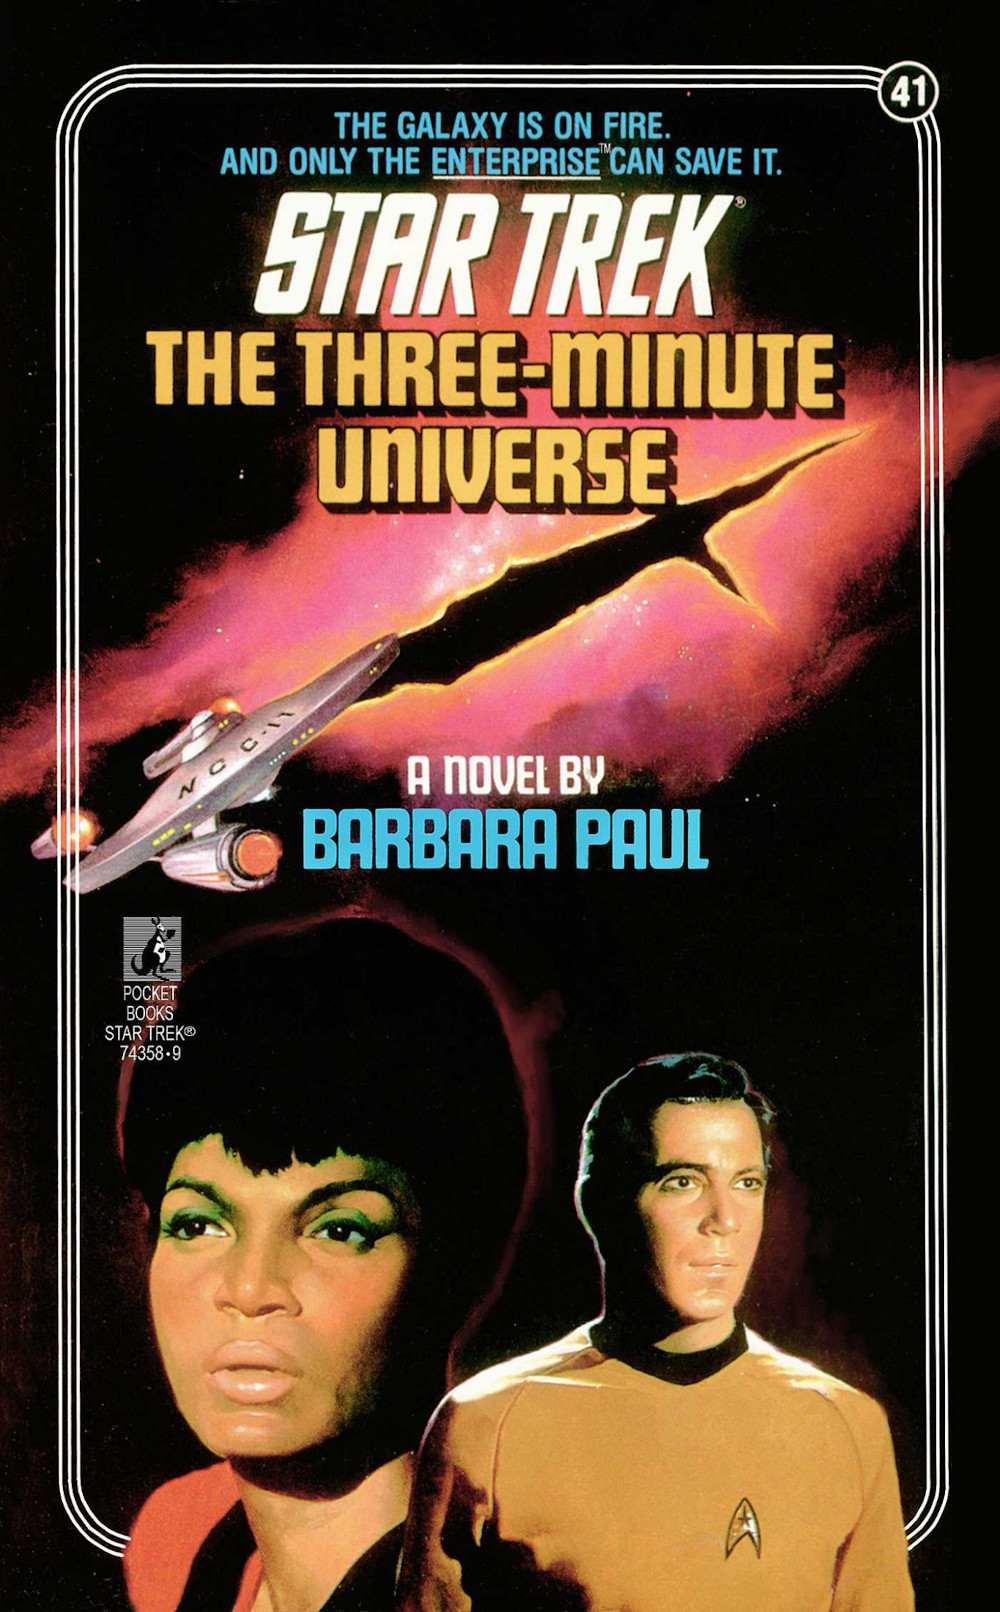 The Three-Minute Universe (Aug 1988)